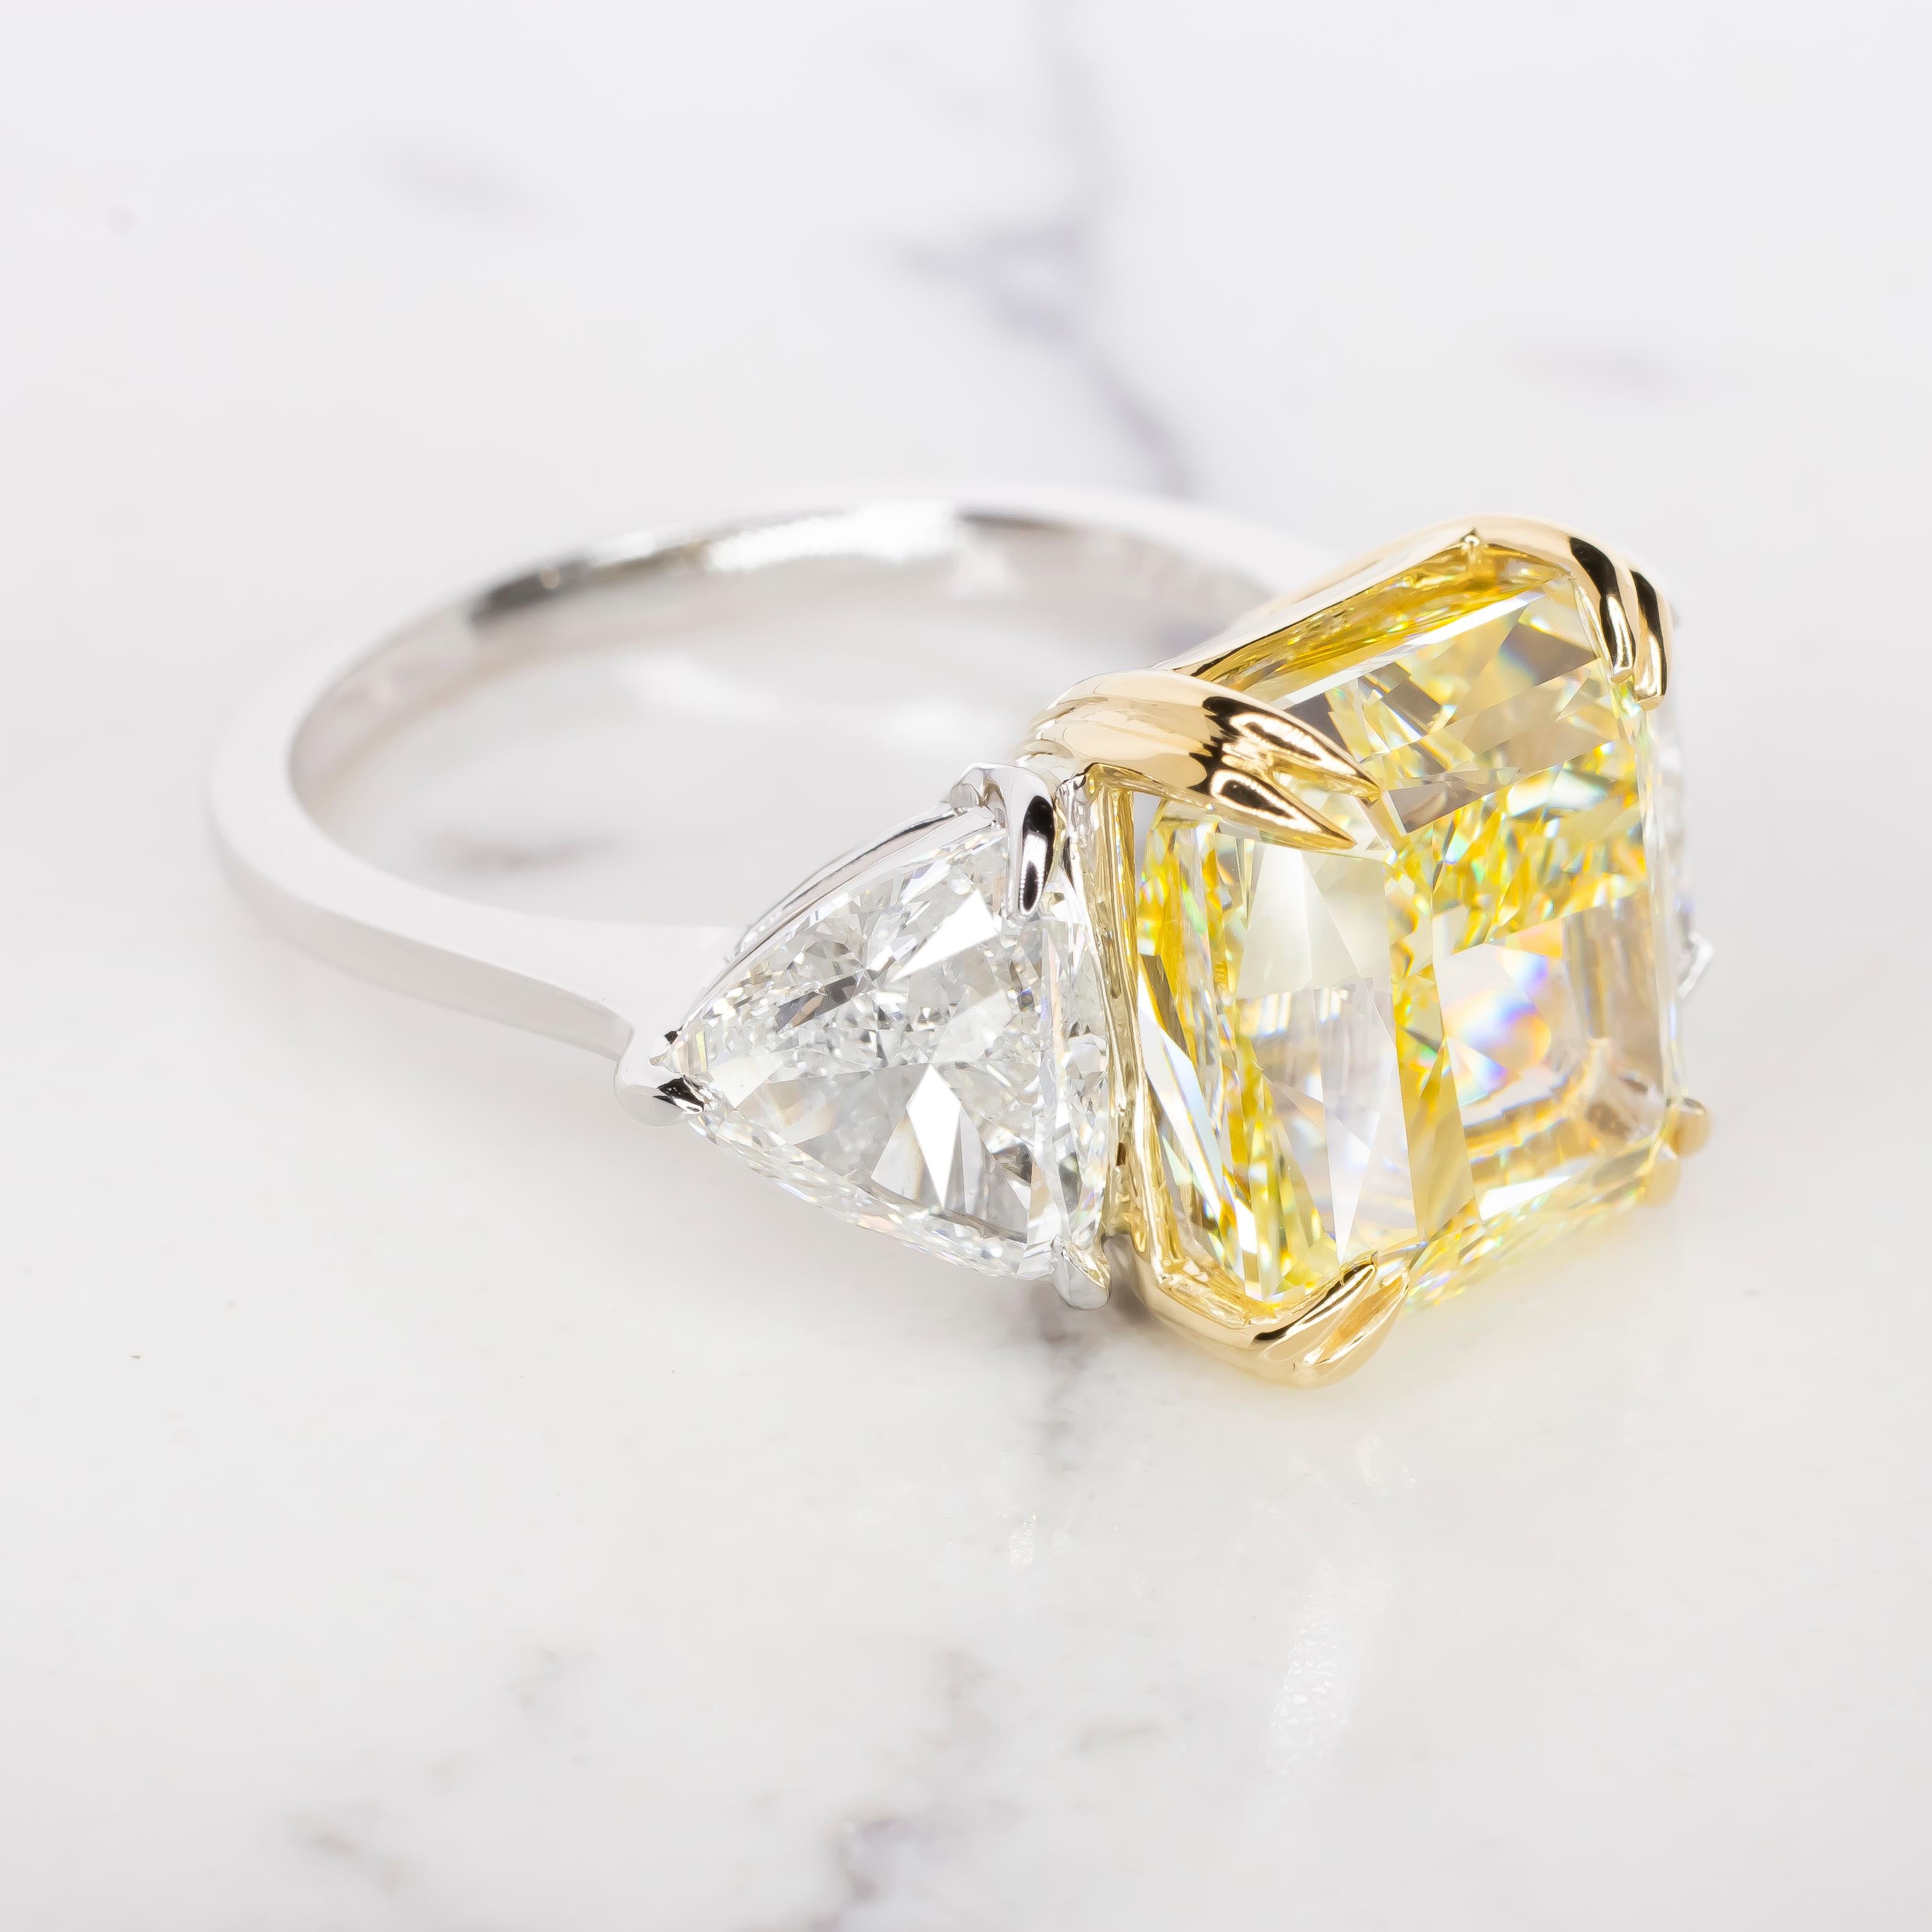 Introducing a masterpiece of unparalleled beauty and prestige: the 8 carat  fancy yellow VVS2 clarity GIA certified diamond ring.

Envision a radiant brilliance that commands attention, emanating from the exquisite radiant-cut diamond at its heart.